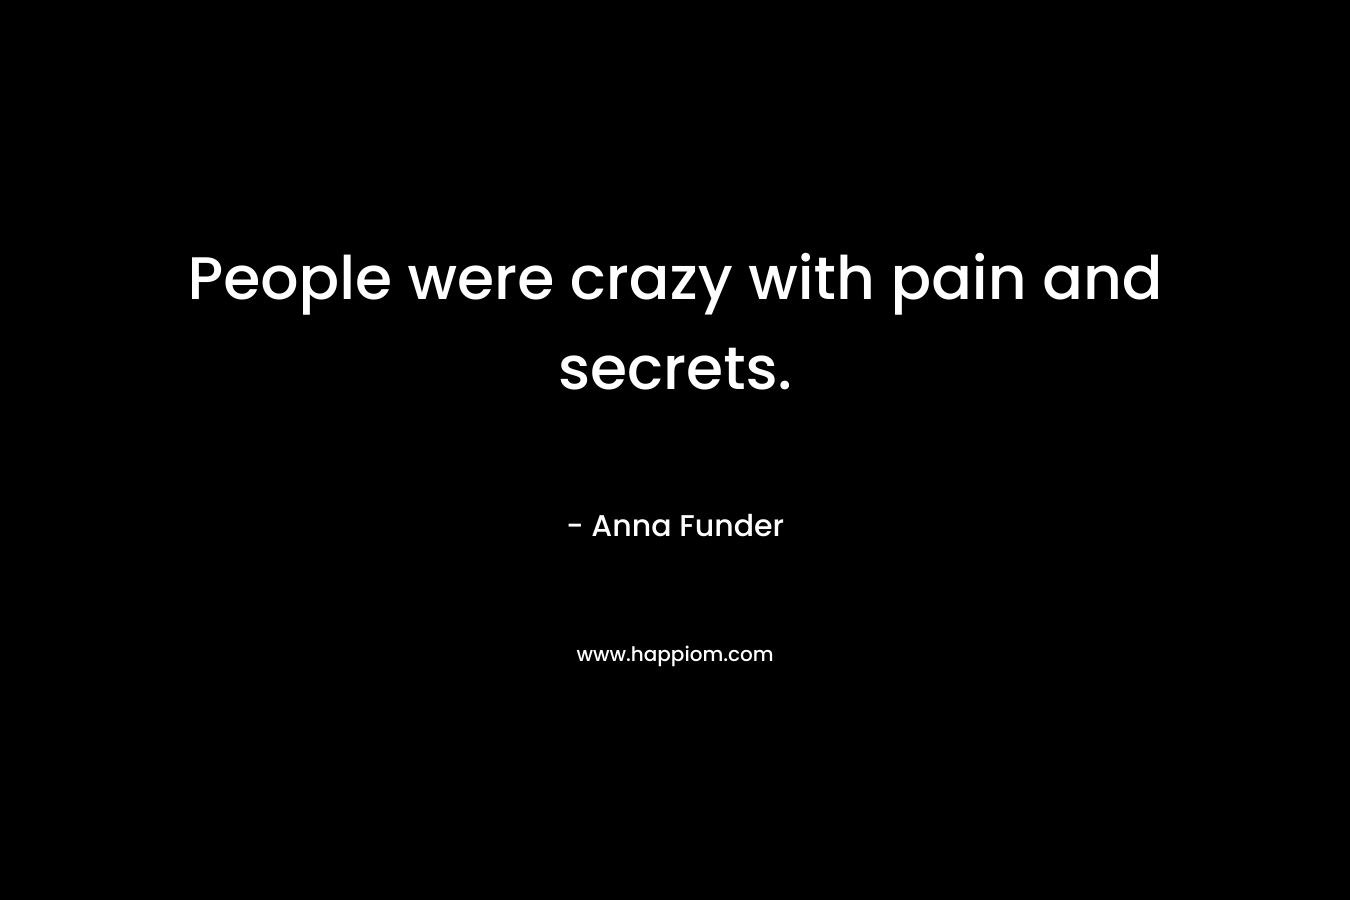 People were crazy with pain and secrets. – Anna Funder